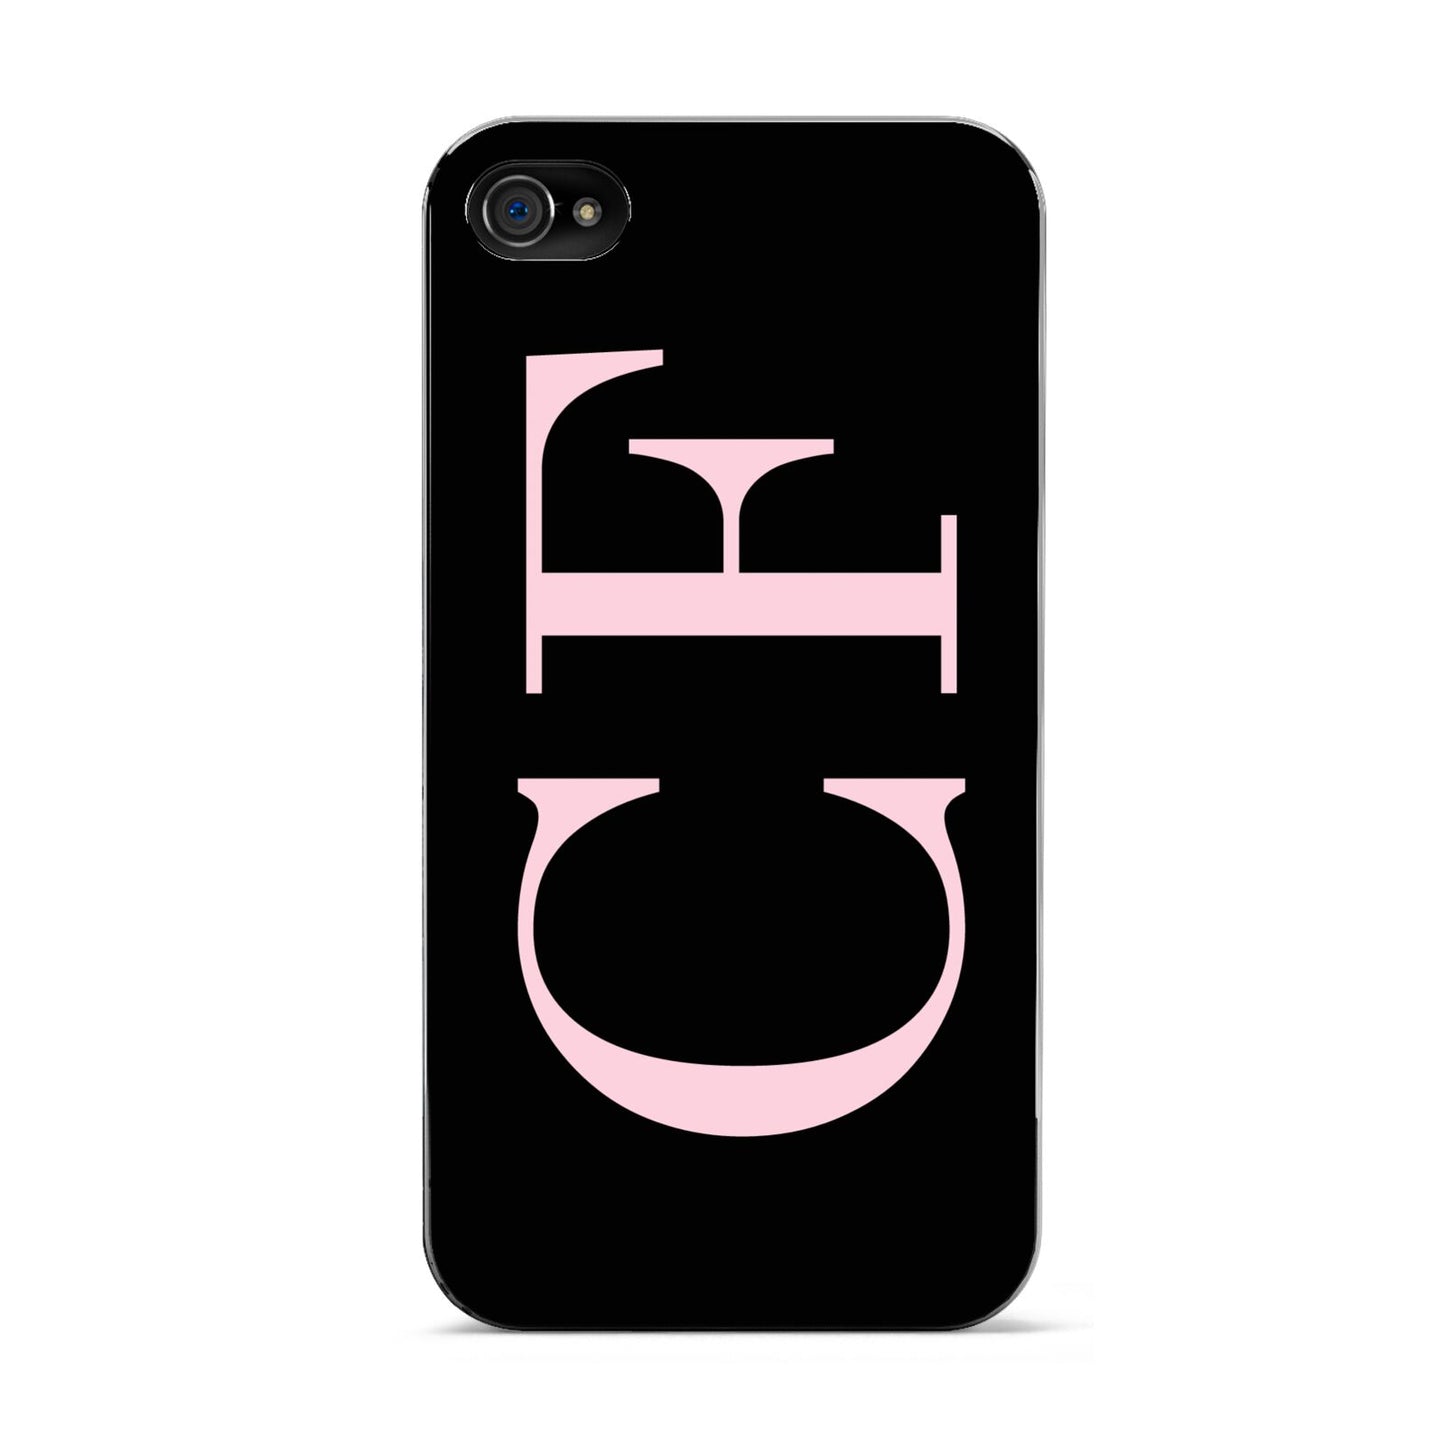 Black with Large Pink Initials Personalised Apple iPhone 4s Case